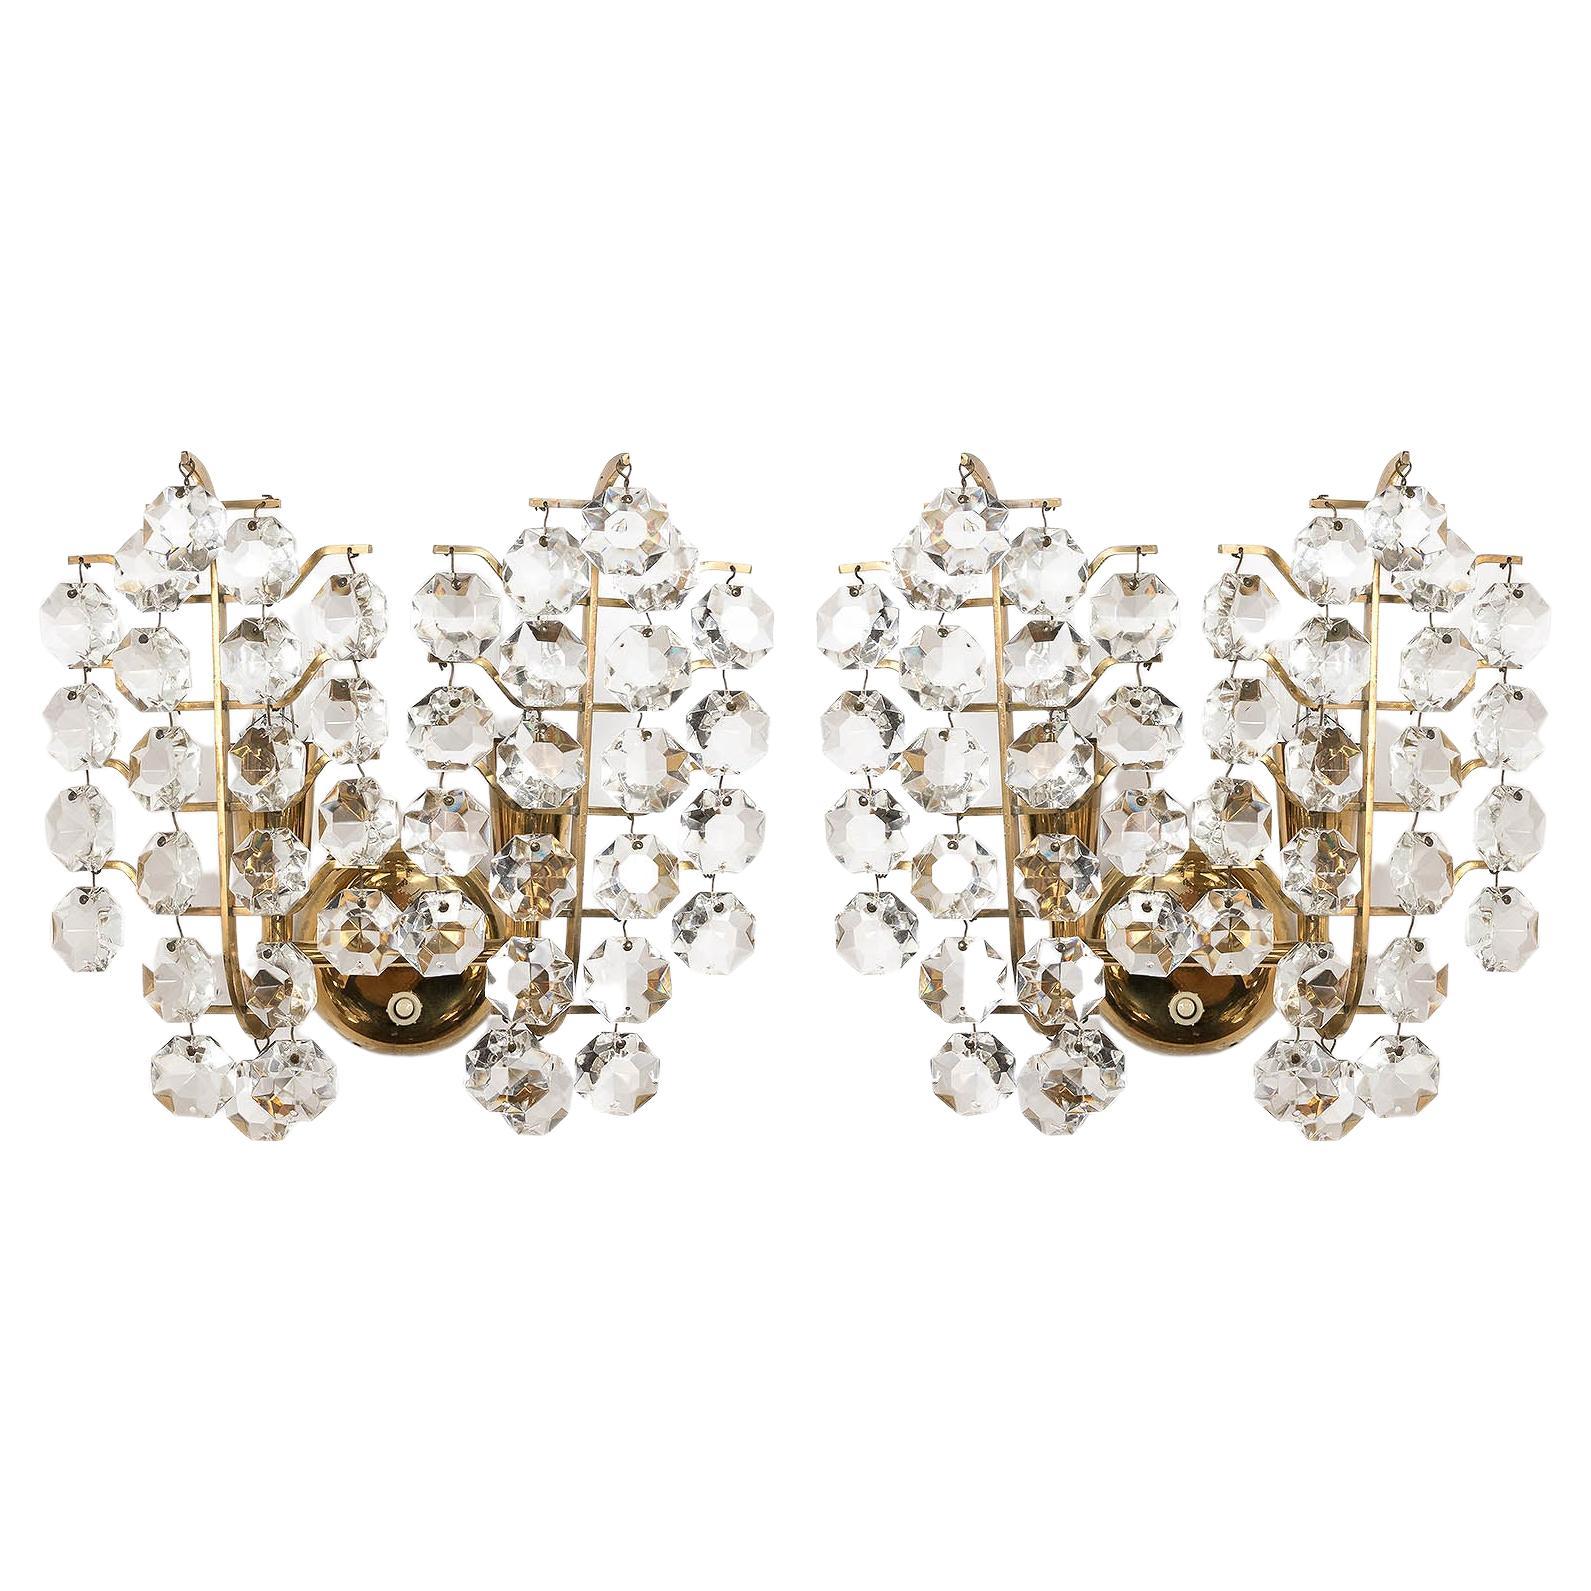 Pair of Bakalowits Sconces Wall Lights, Brass Crystal Glass, 1960s